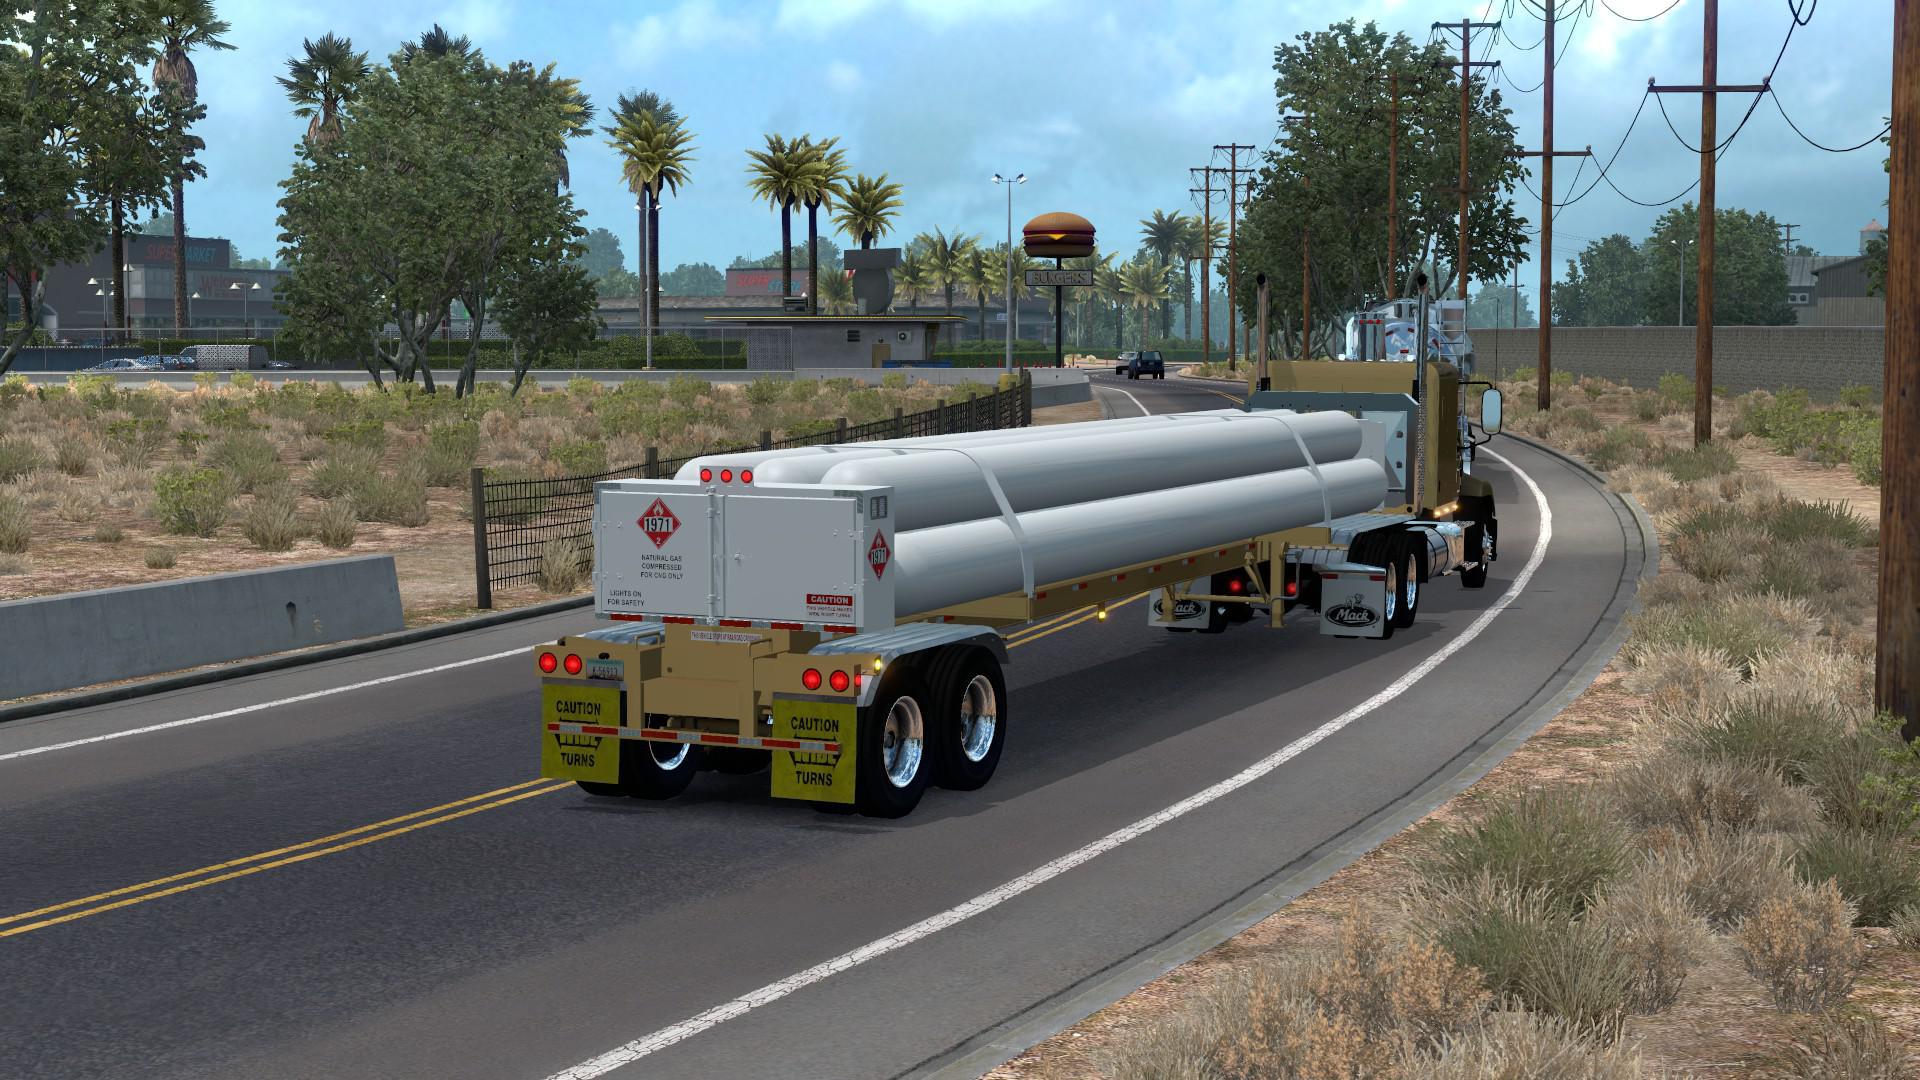 compressed natural gas